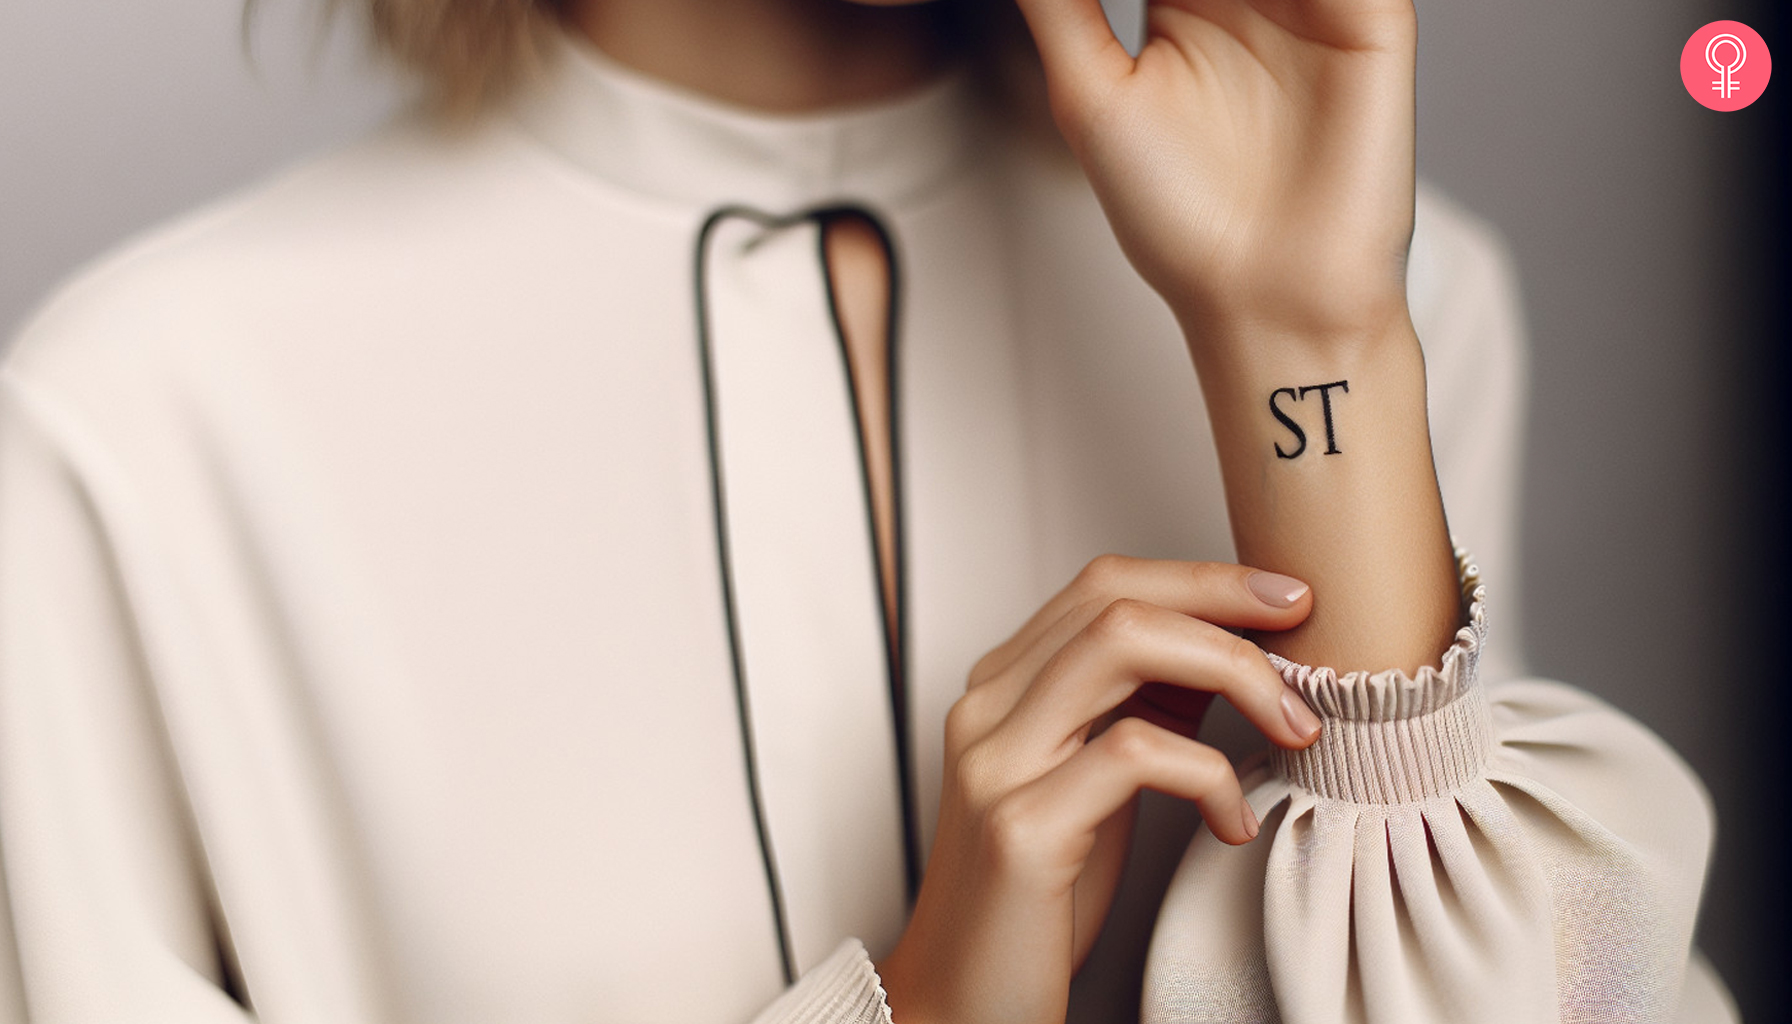 A S and T letter tattoo design on the upper arm